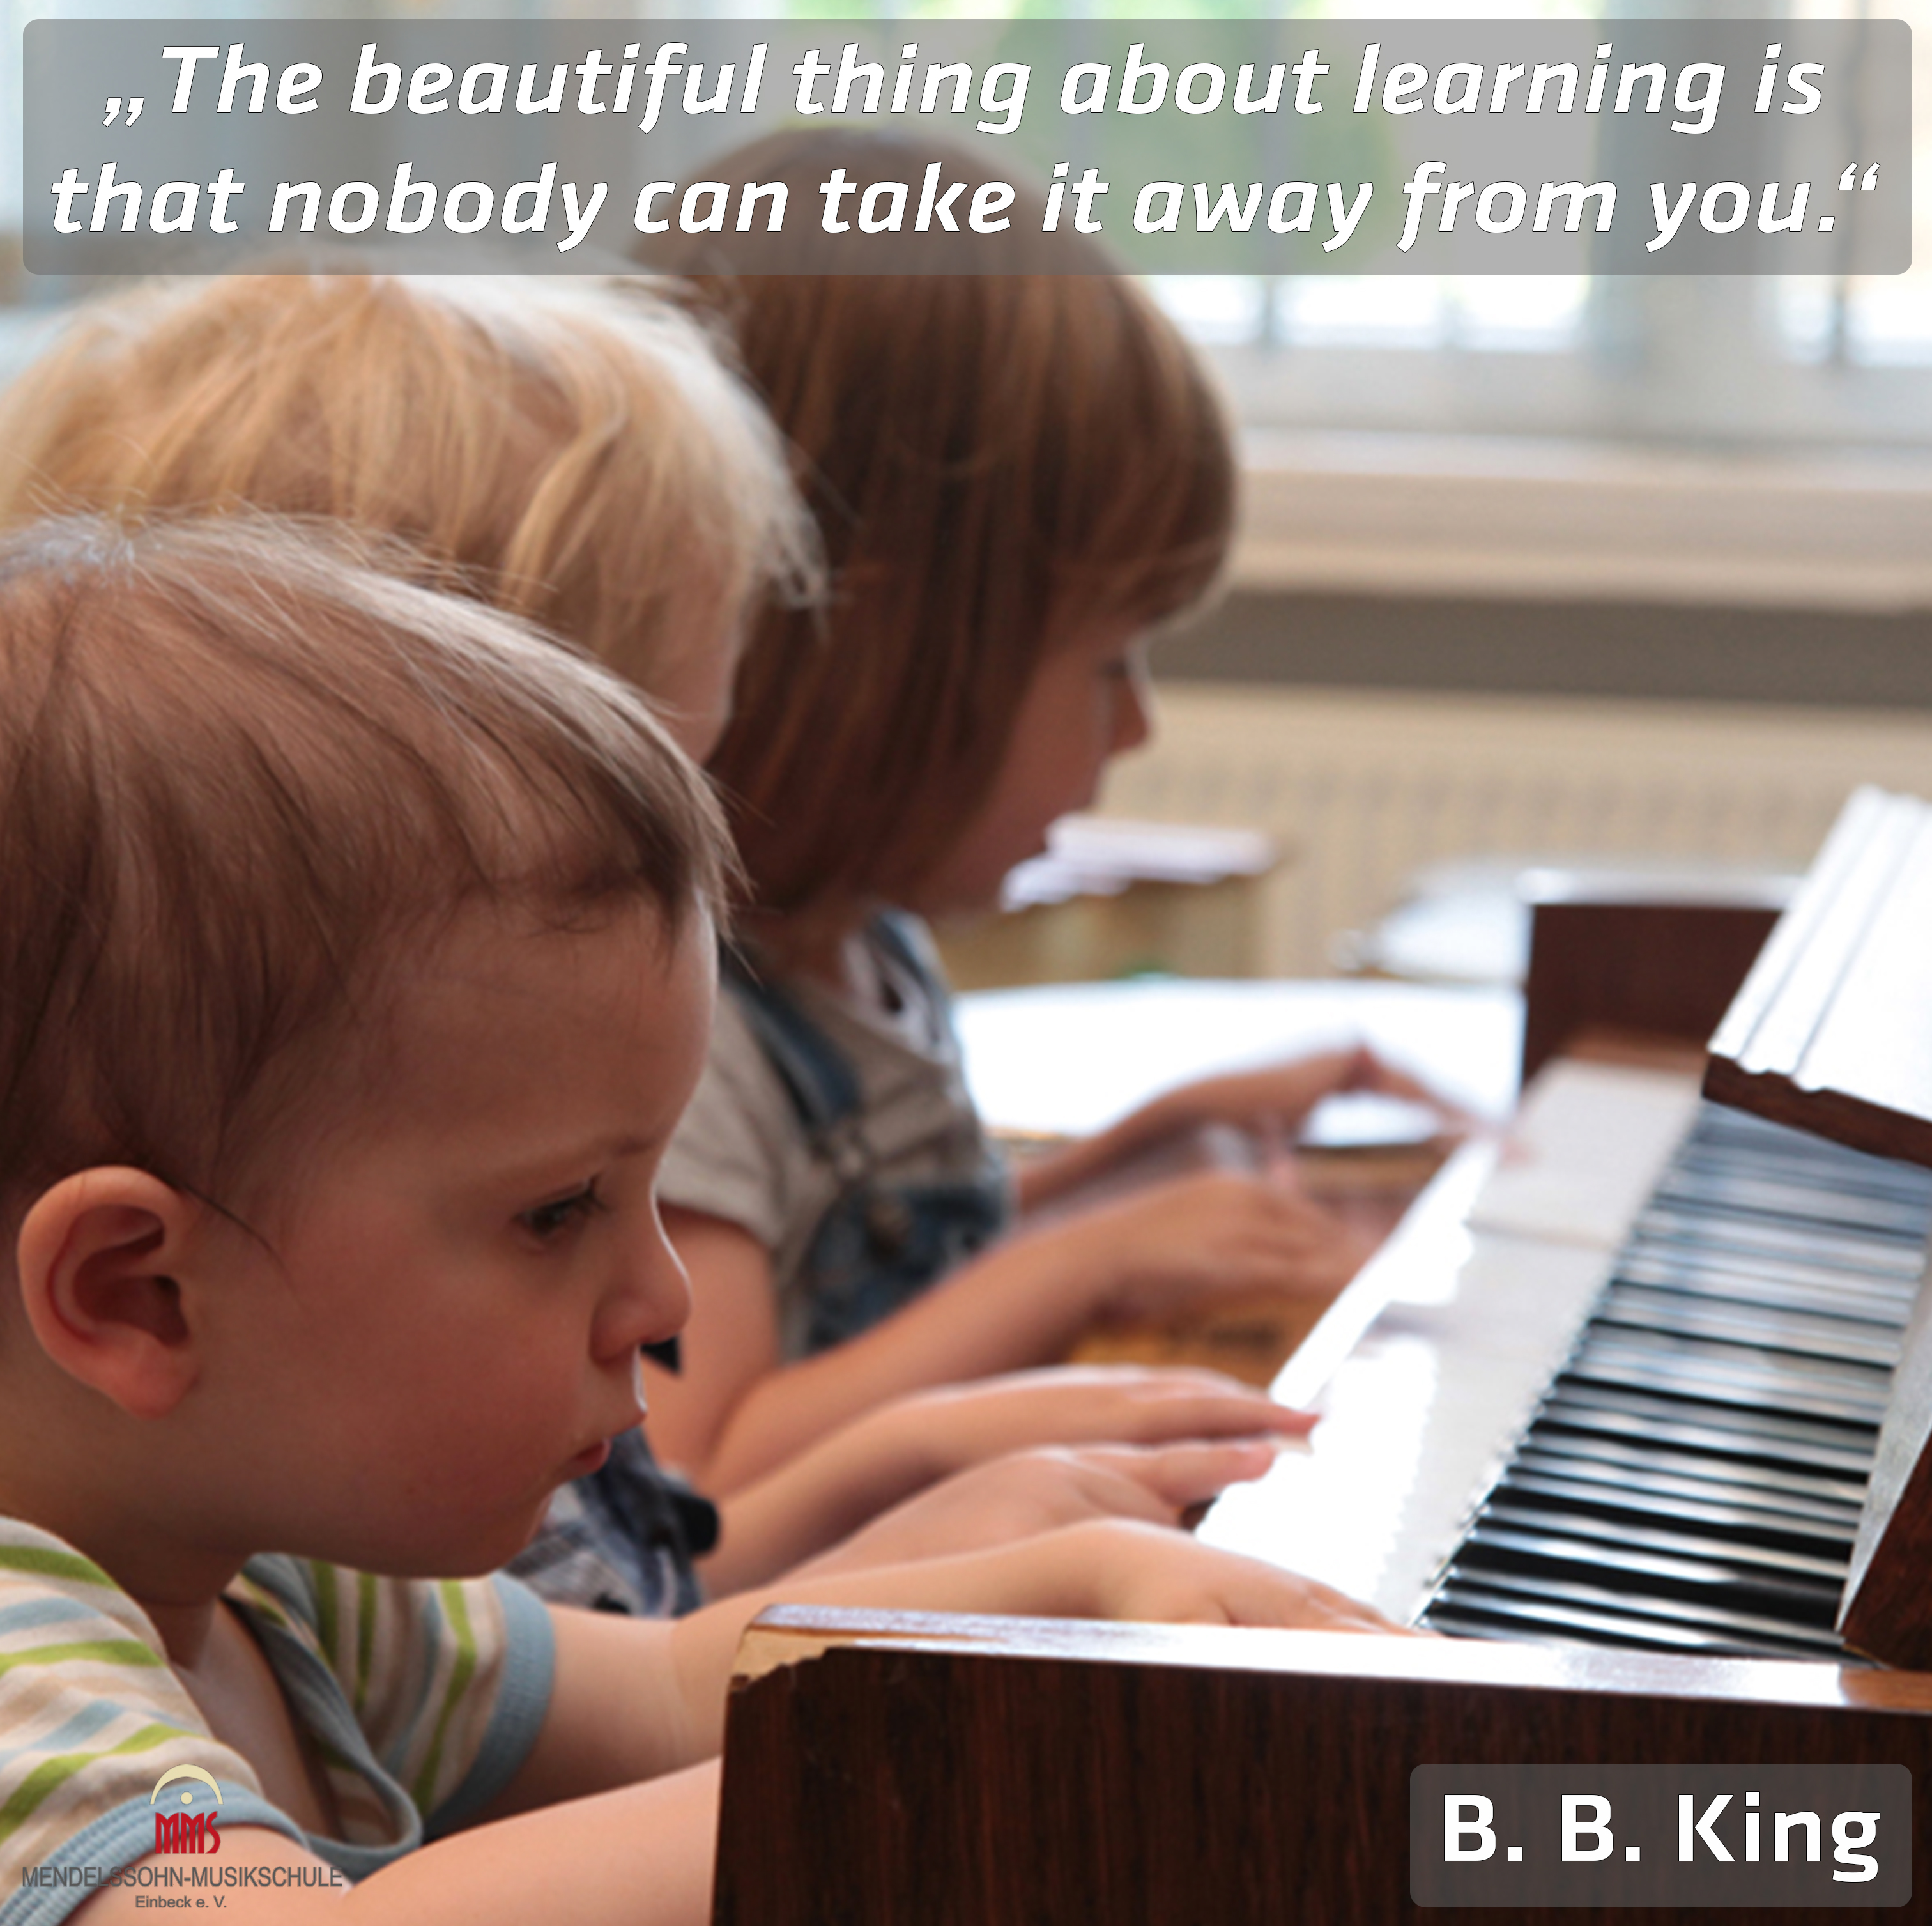 „The beautiful thing about learning is that nobody can take it away from you.“ B. B. King